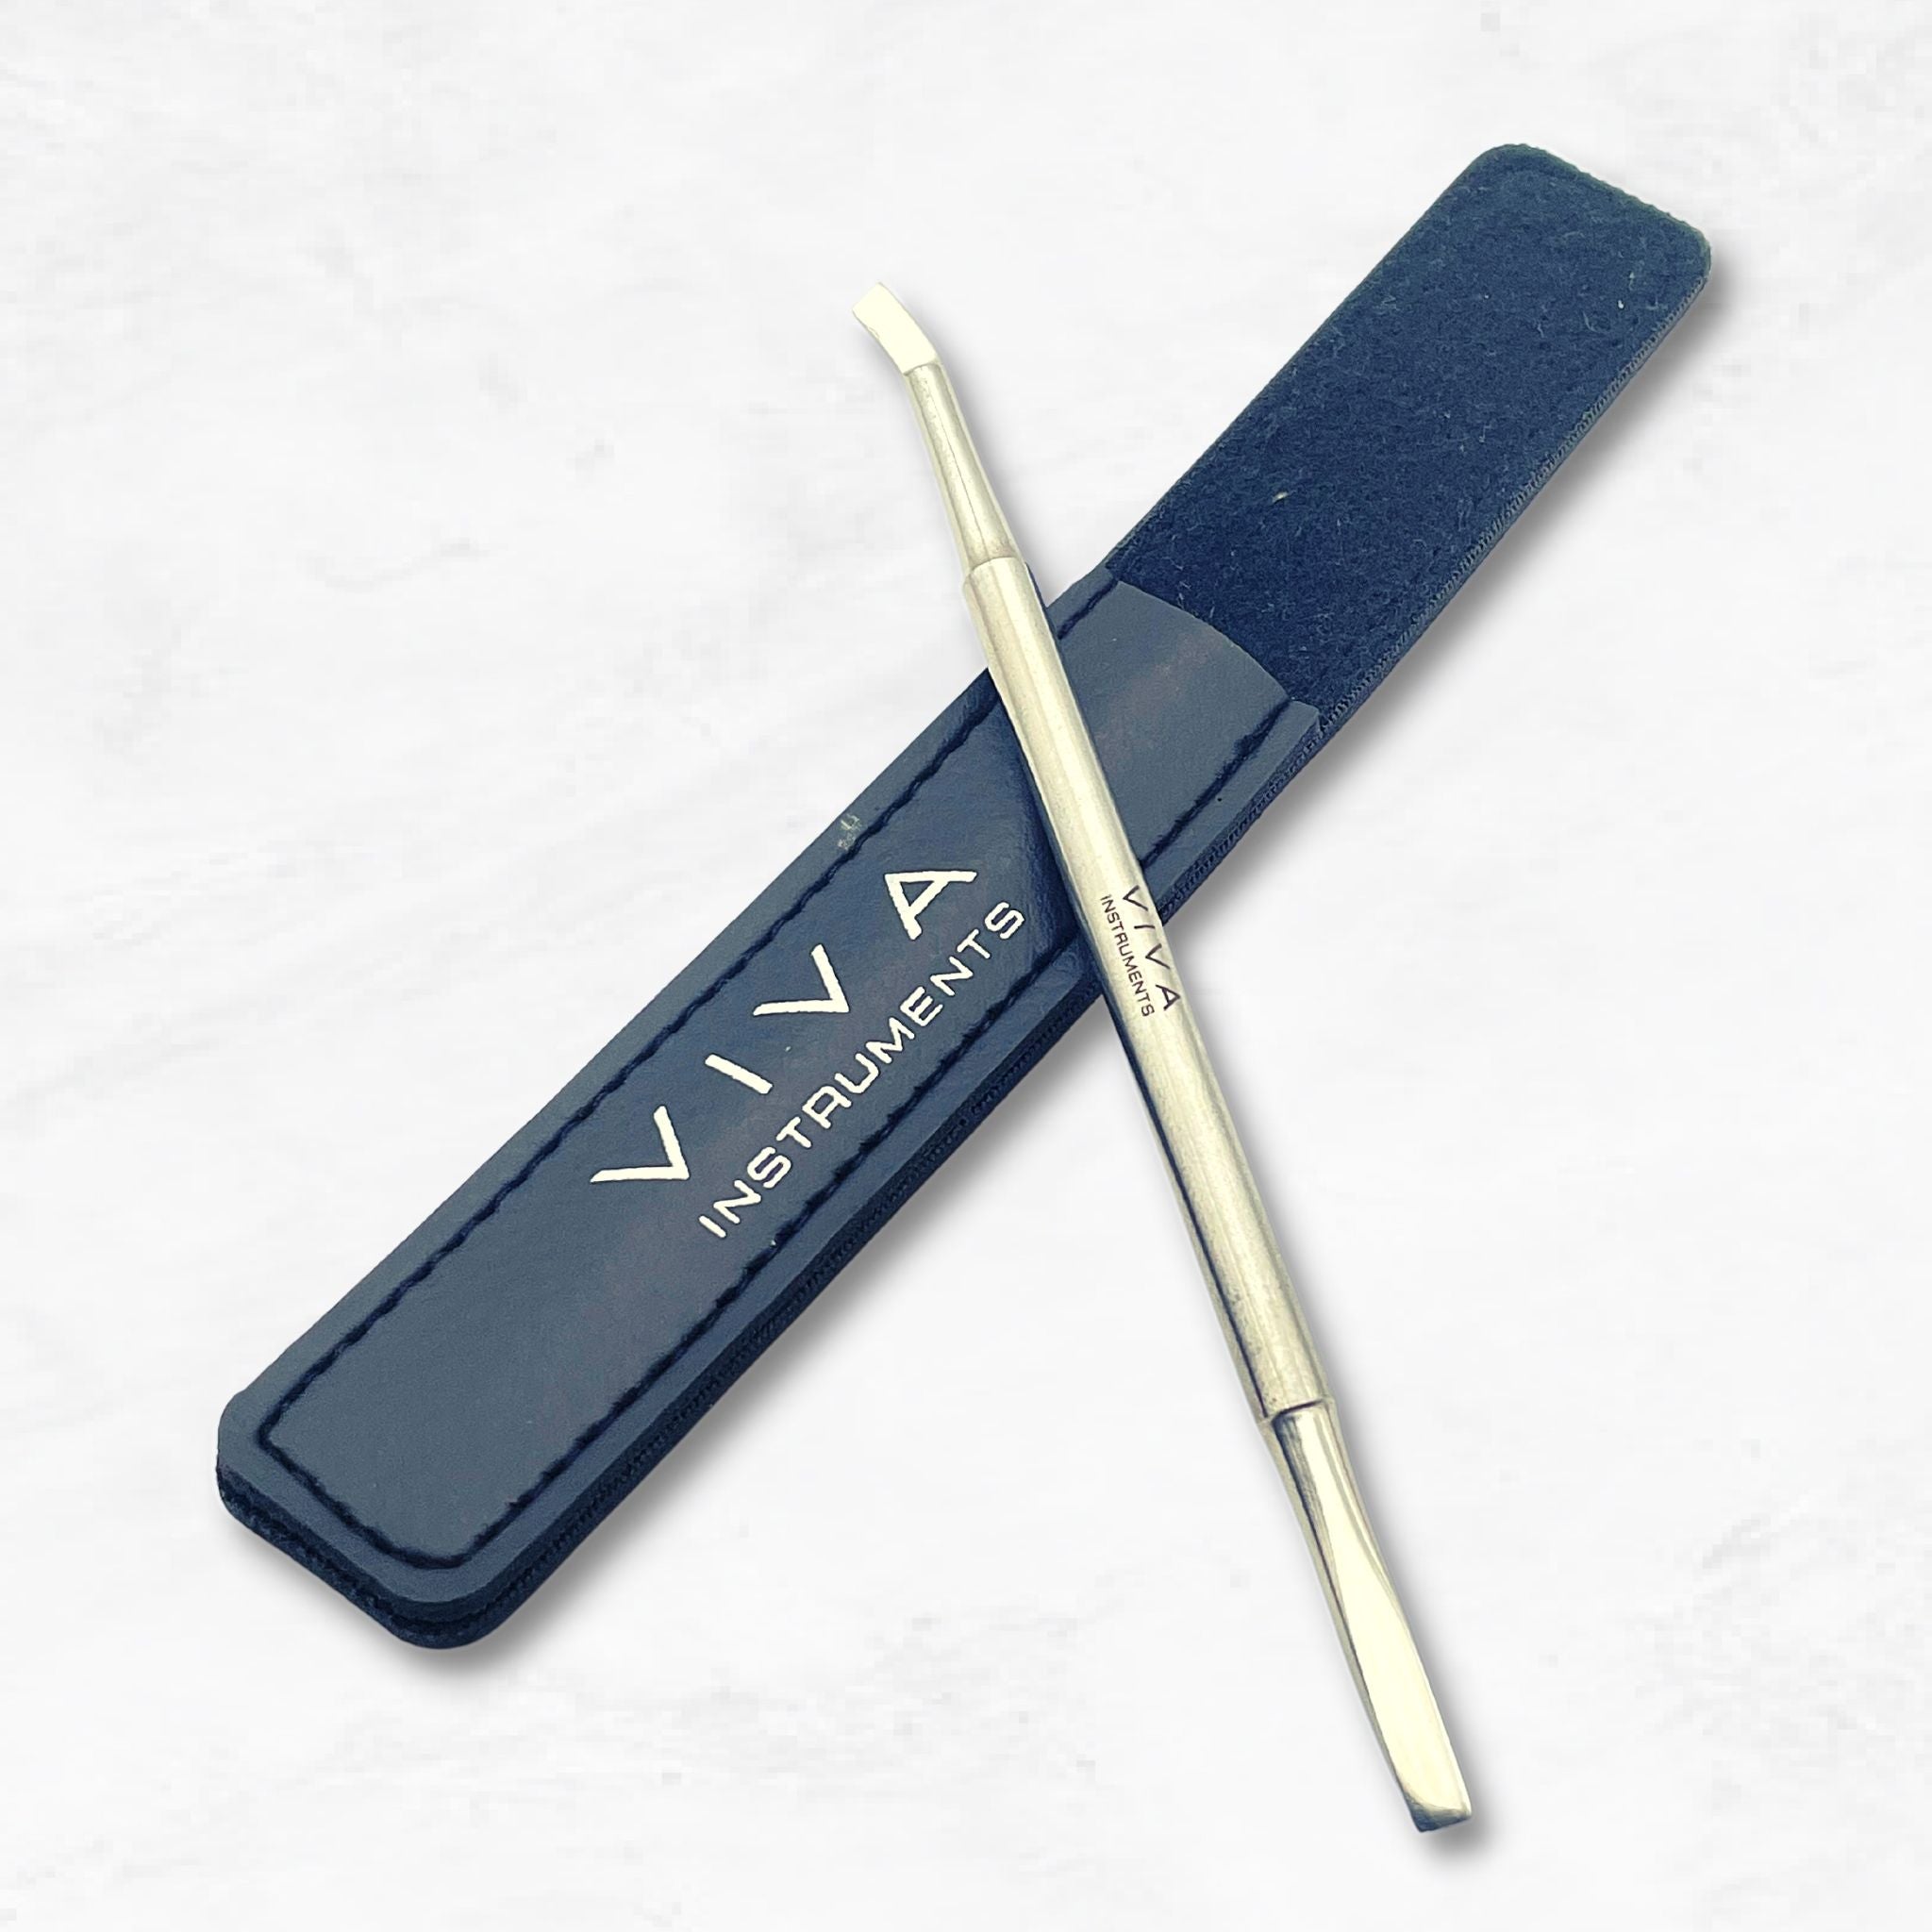 cuticle pusher nail gel remover - viva instruments